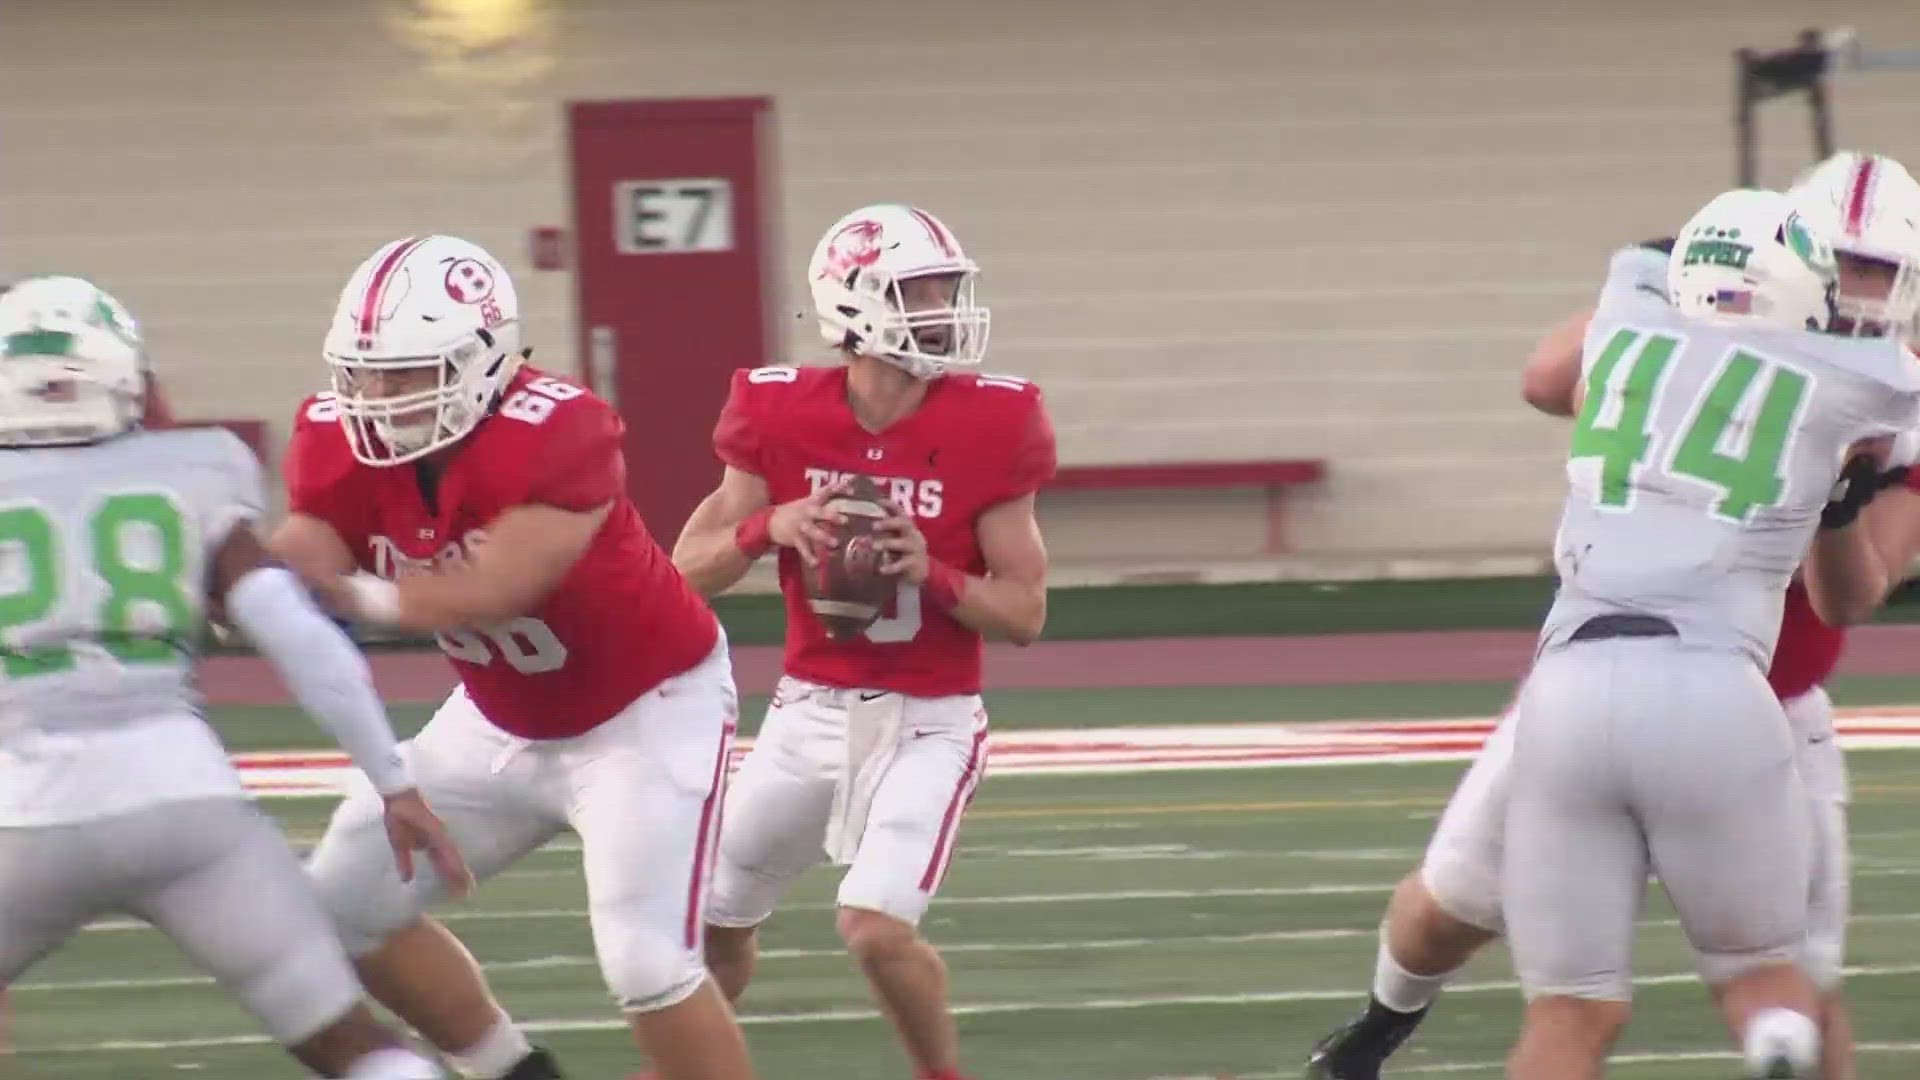 Coming off of a district title, the Belton Tigers are looking to repeat last year's success.